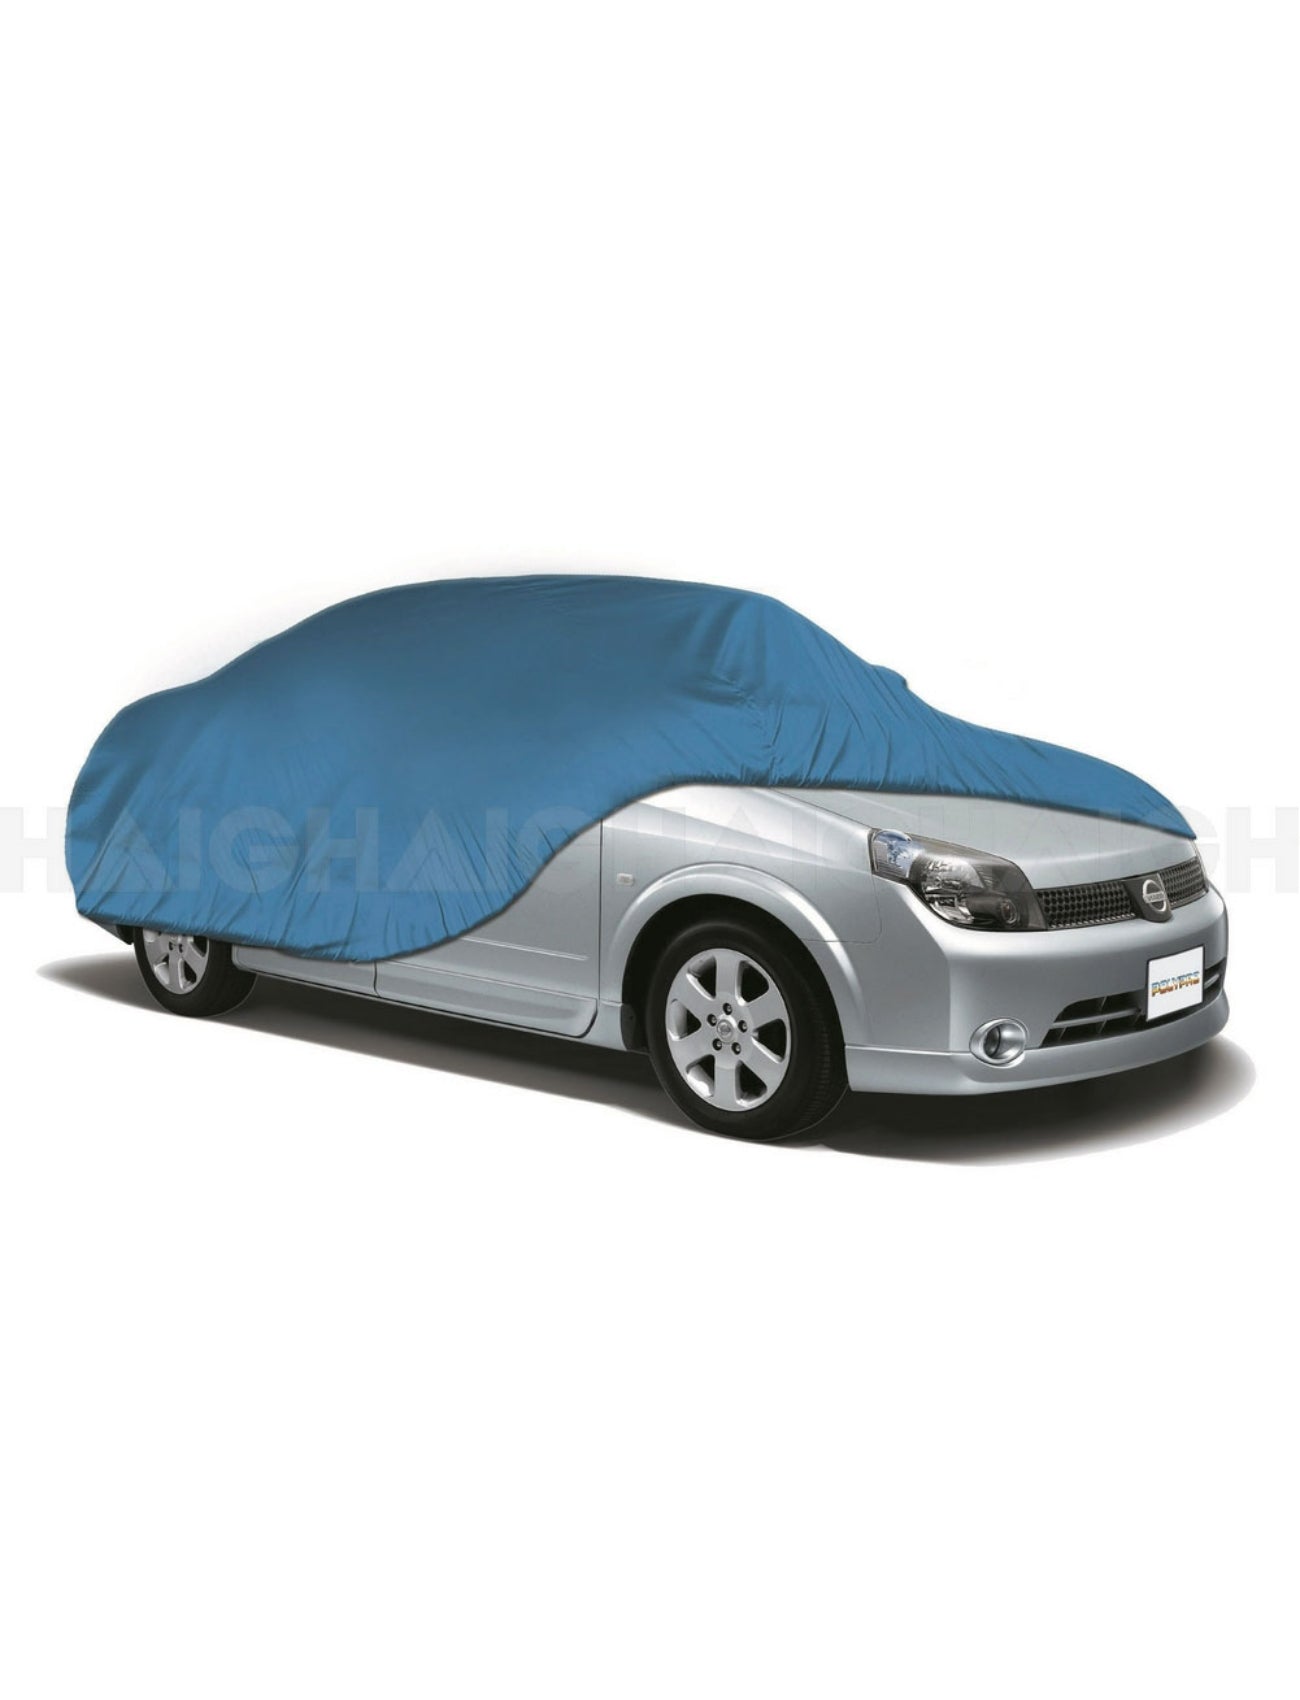 CAR COVER POLYPRO LARGE/X-LARGE